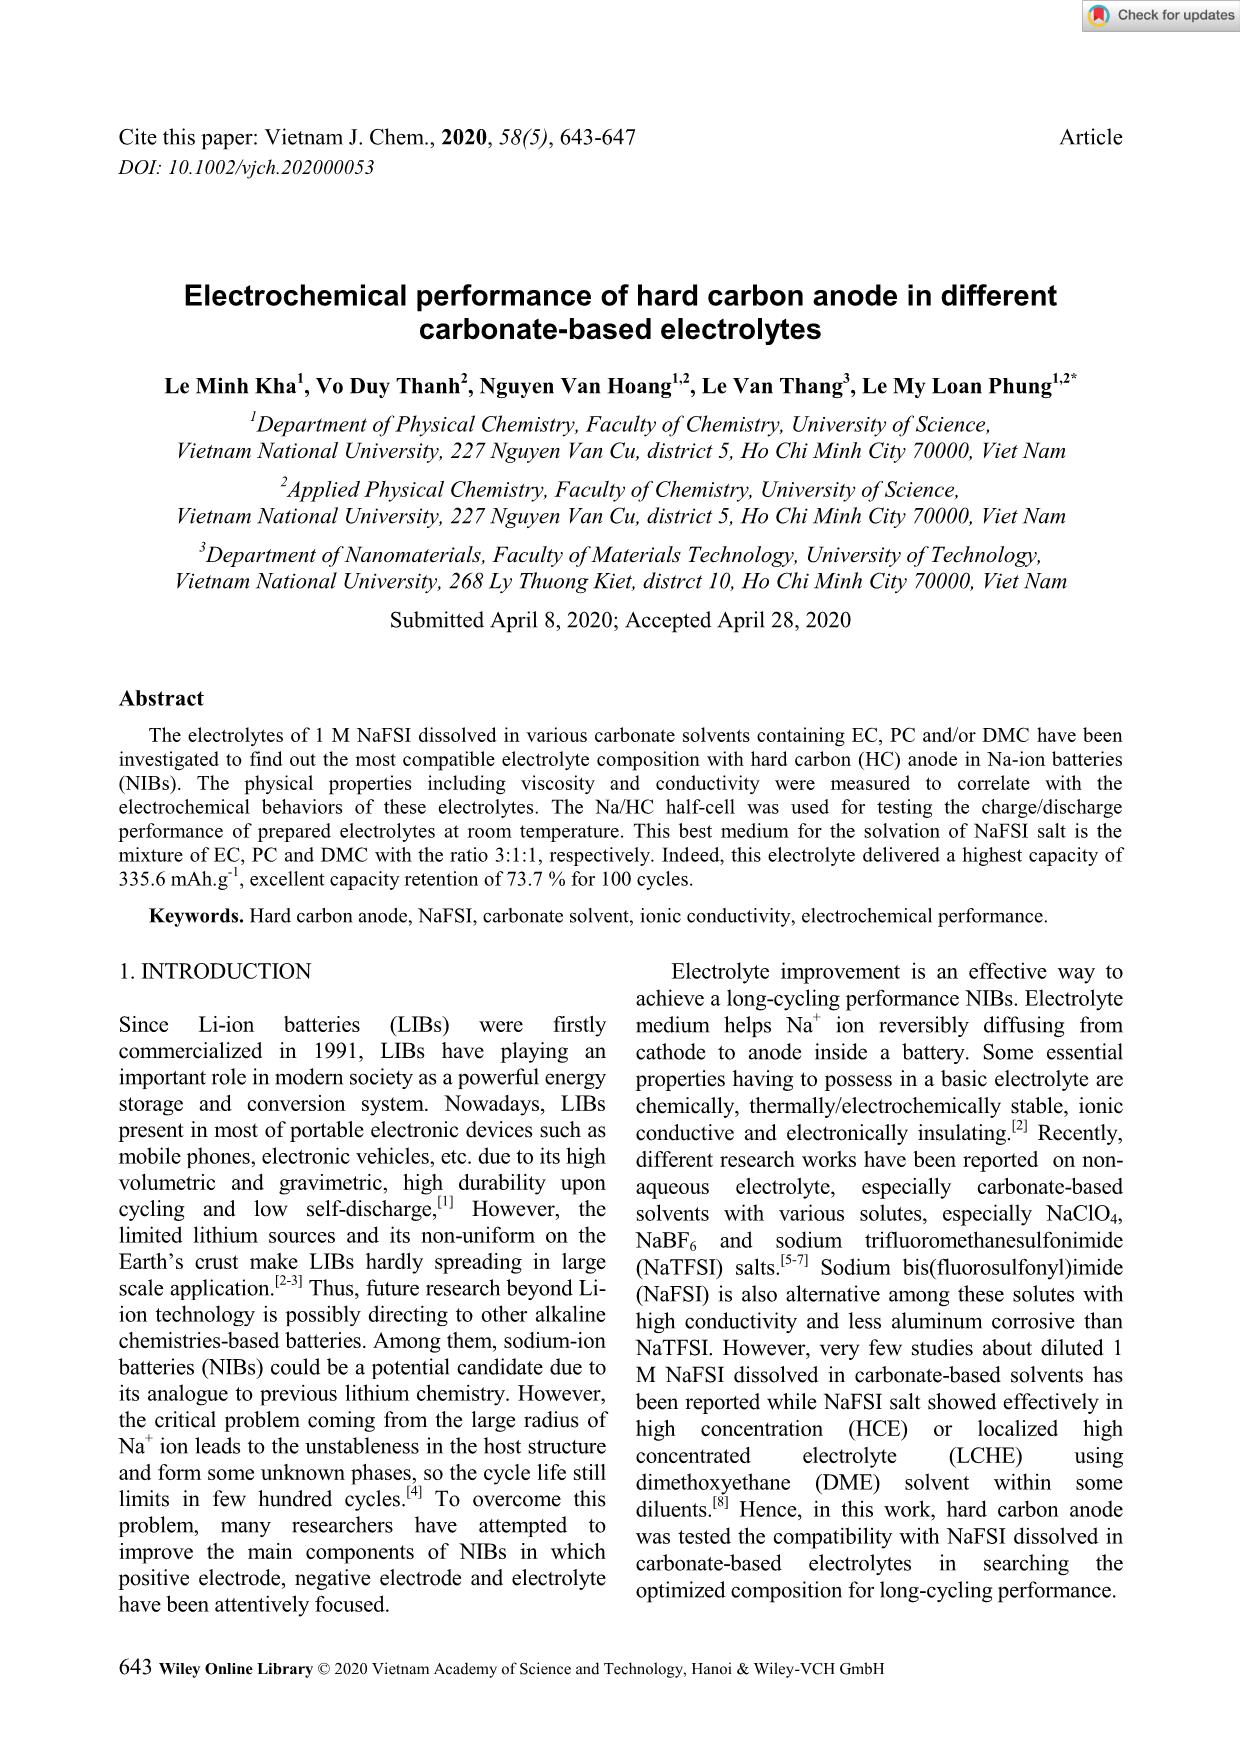 Electrochemical performance of hard carbon anode in different carbonate-Based electrolytes trang 1